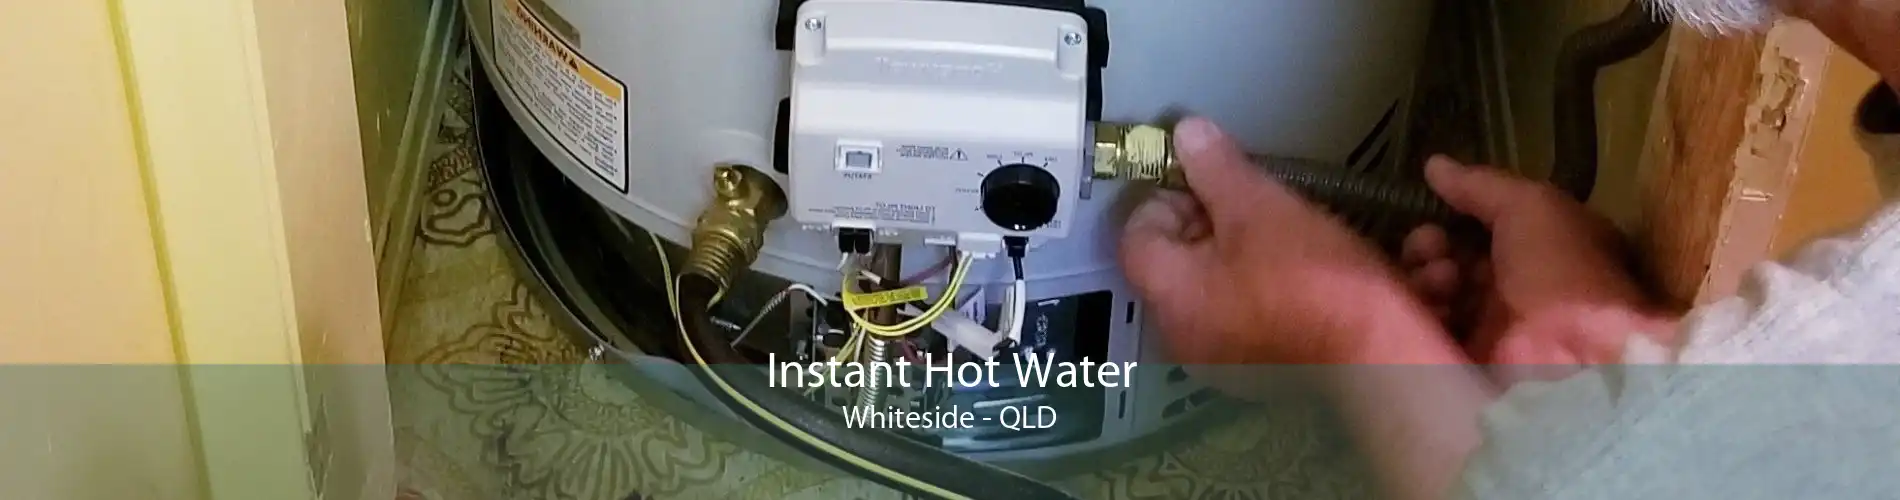 Instant Hot Water Whiteside - QLD